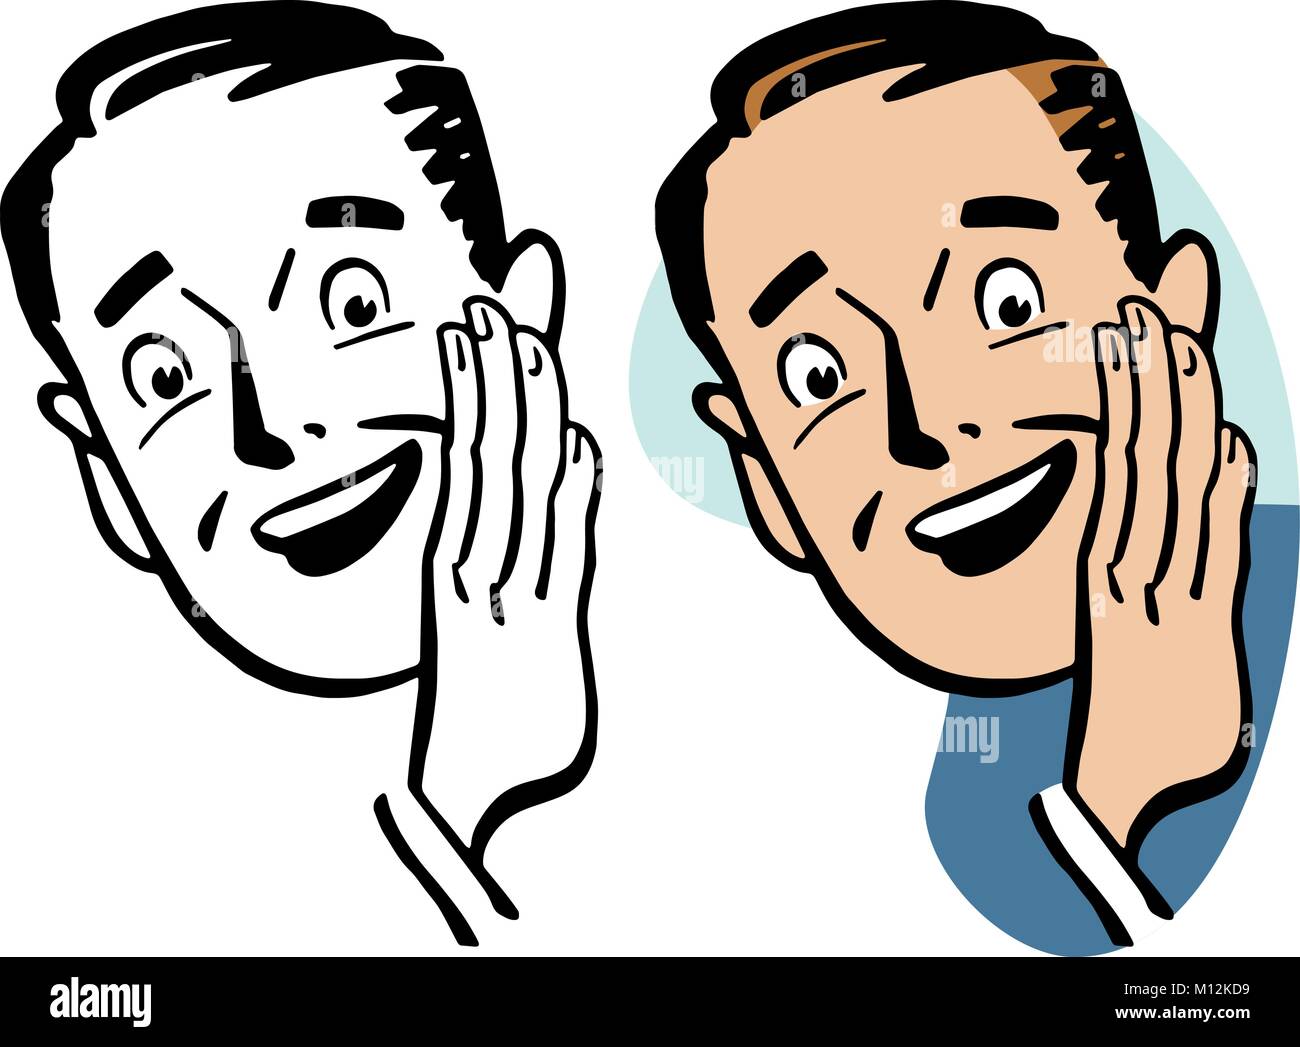 People Gossiping Cartoon High Resolution Stock Photography And Images Alamy